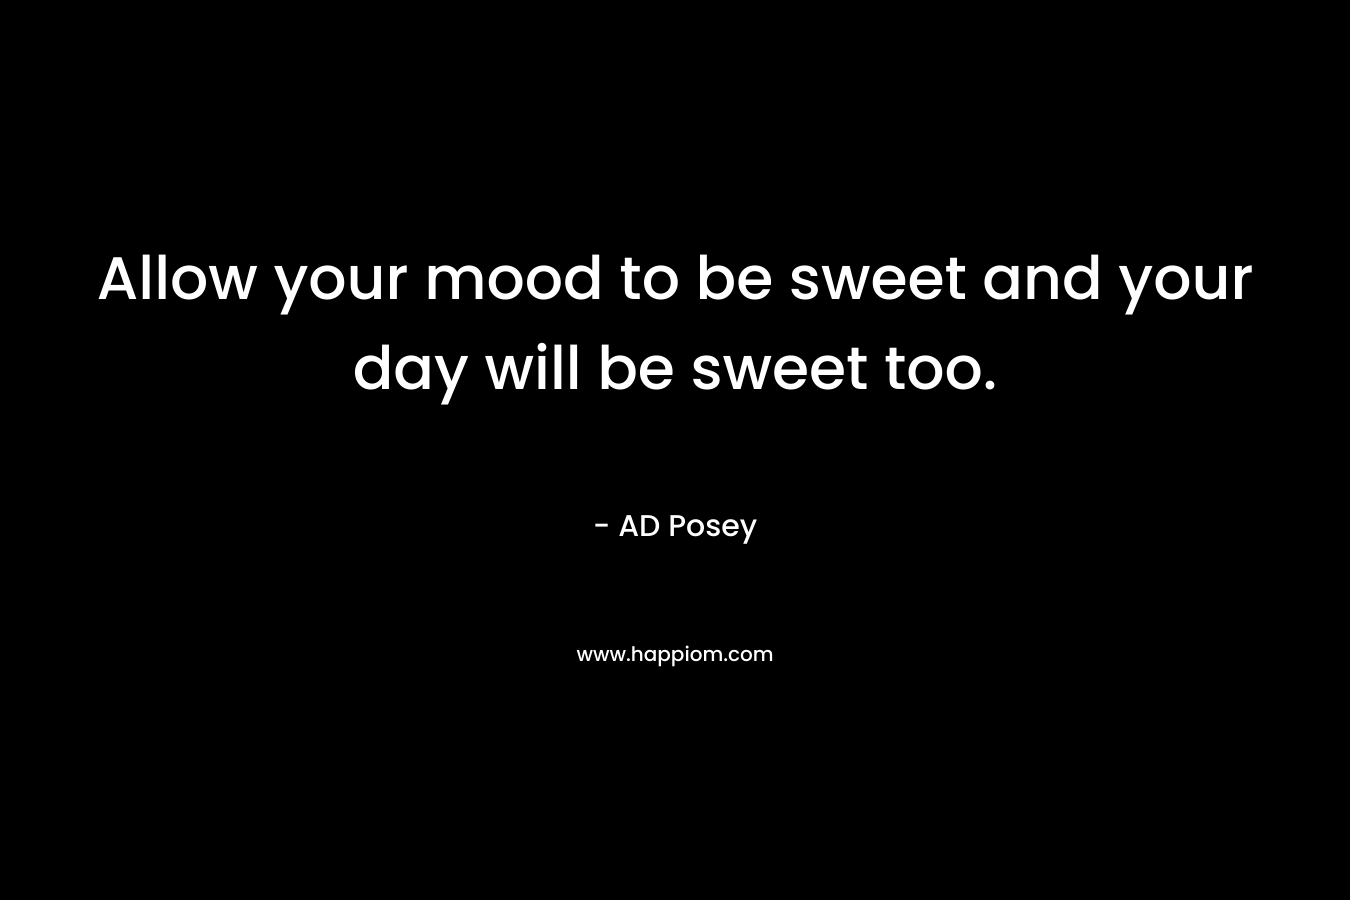 Allow your mood to be sweet and your day will be sweet too.